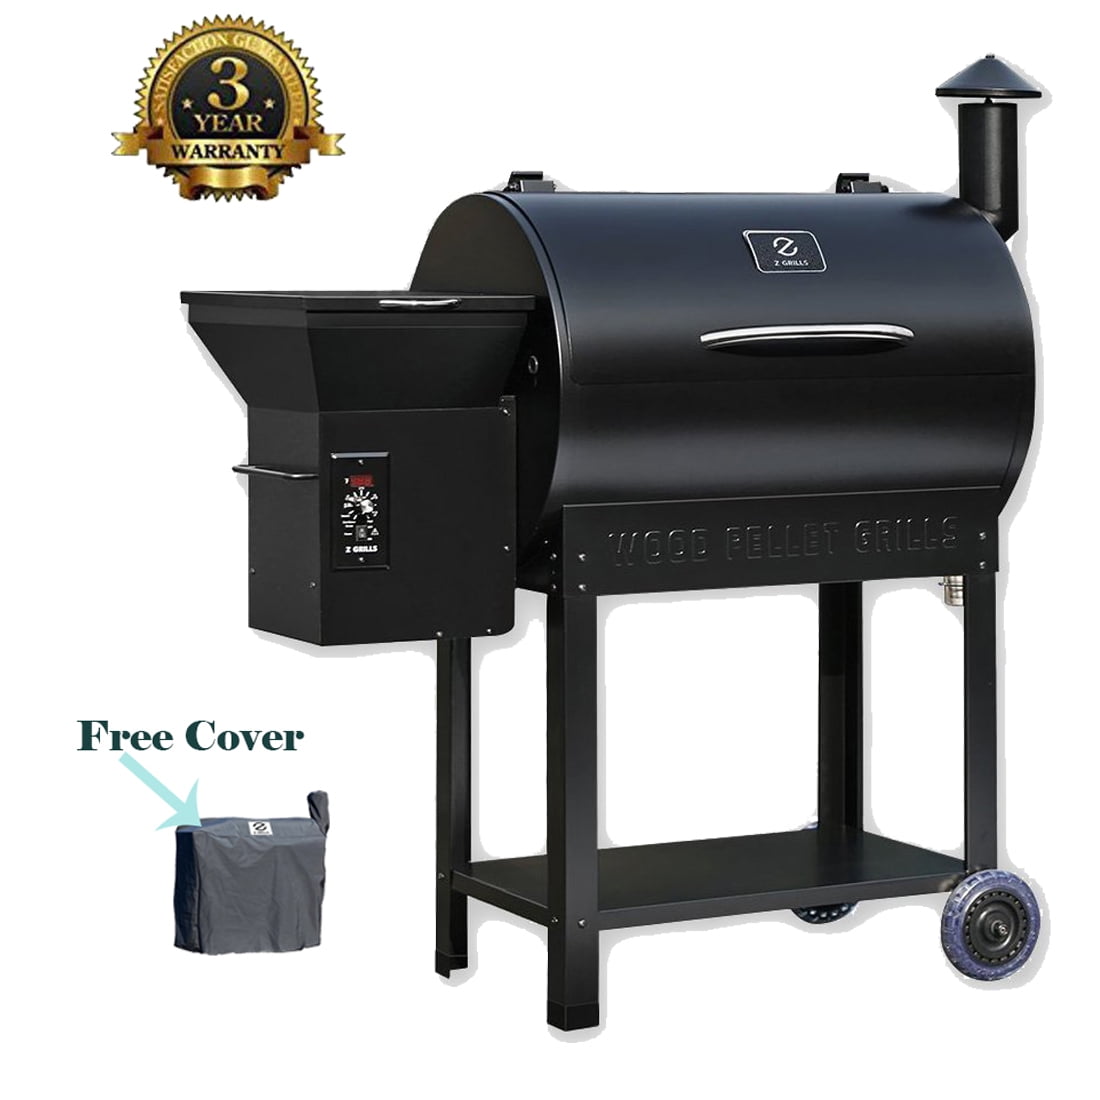 Z Grills 700 sq in Wood Pellet Barbecue Grill and Smoker w ...